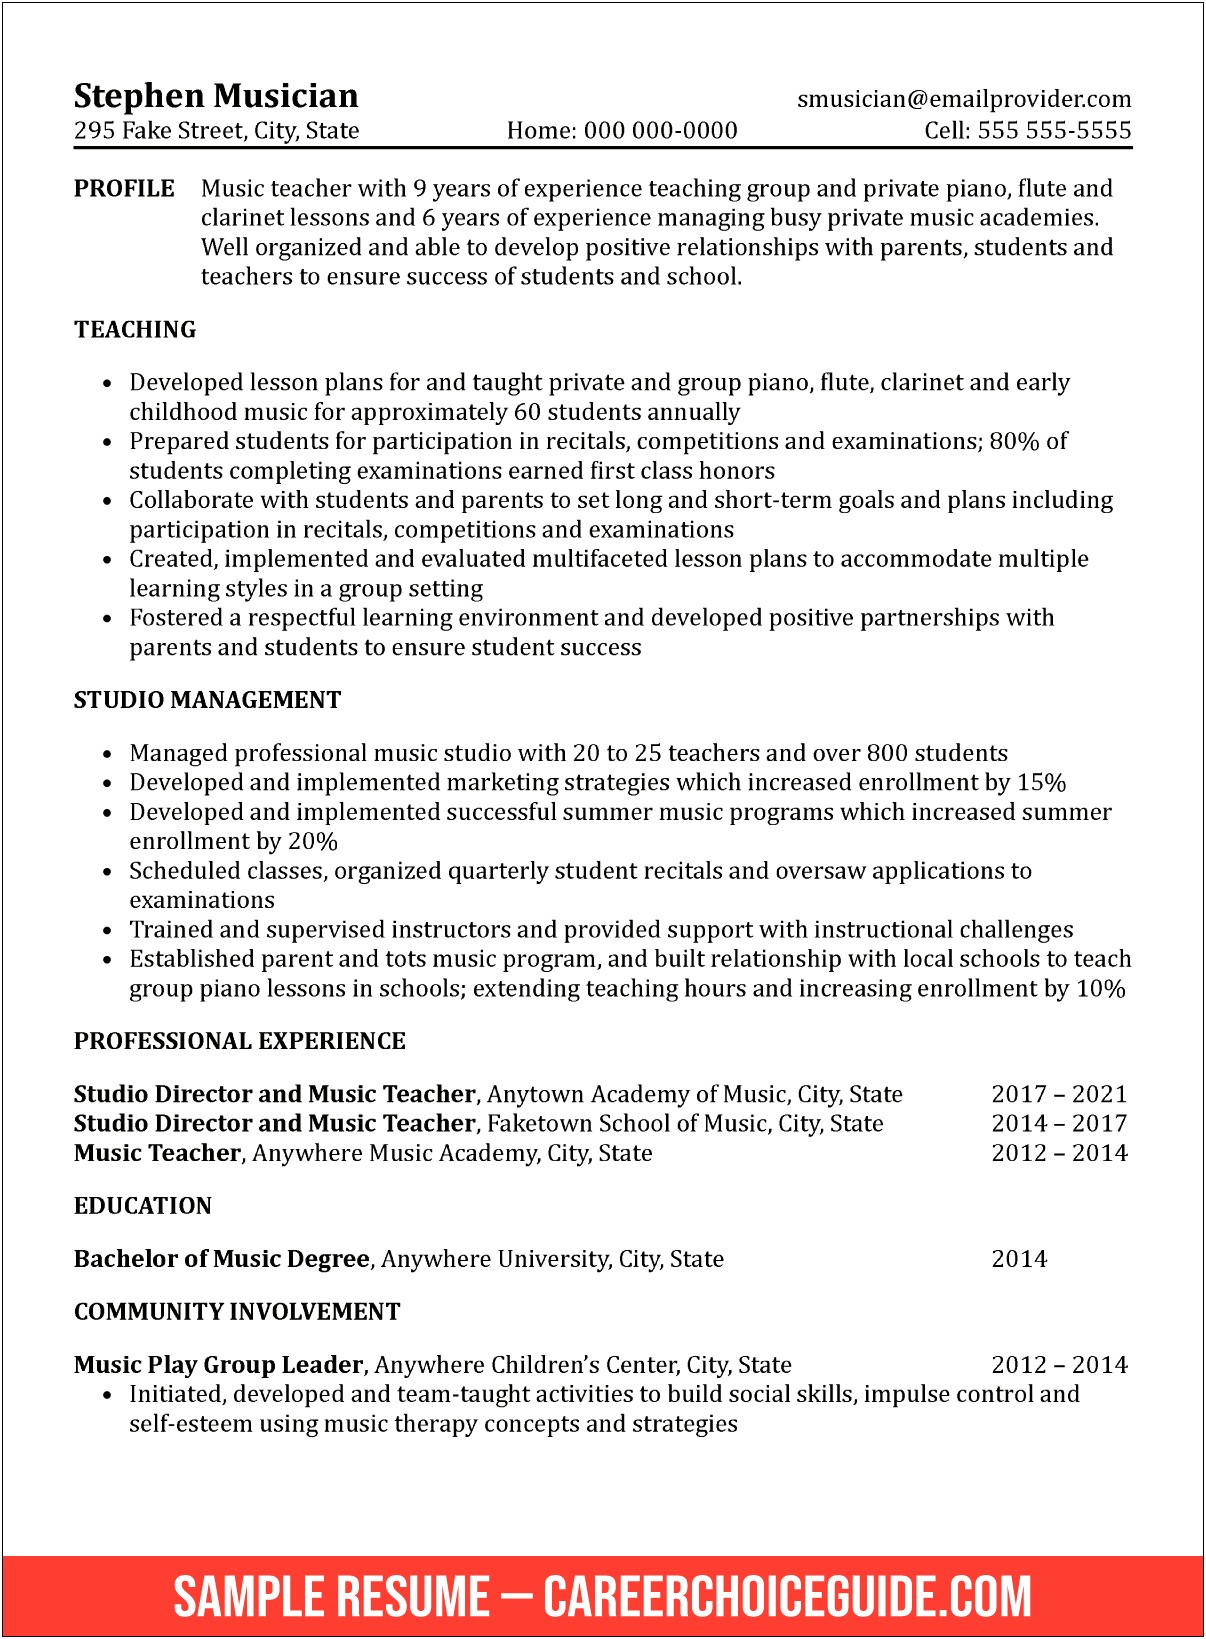 Professional Experience Sample For A Resume